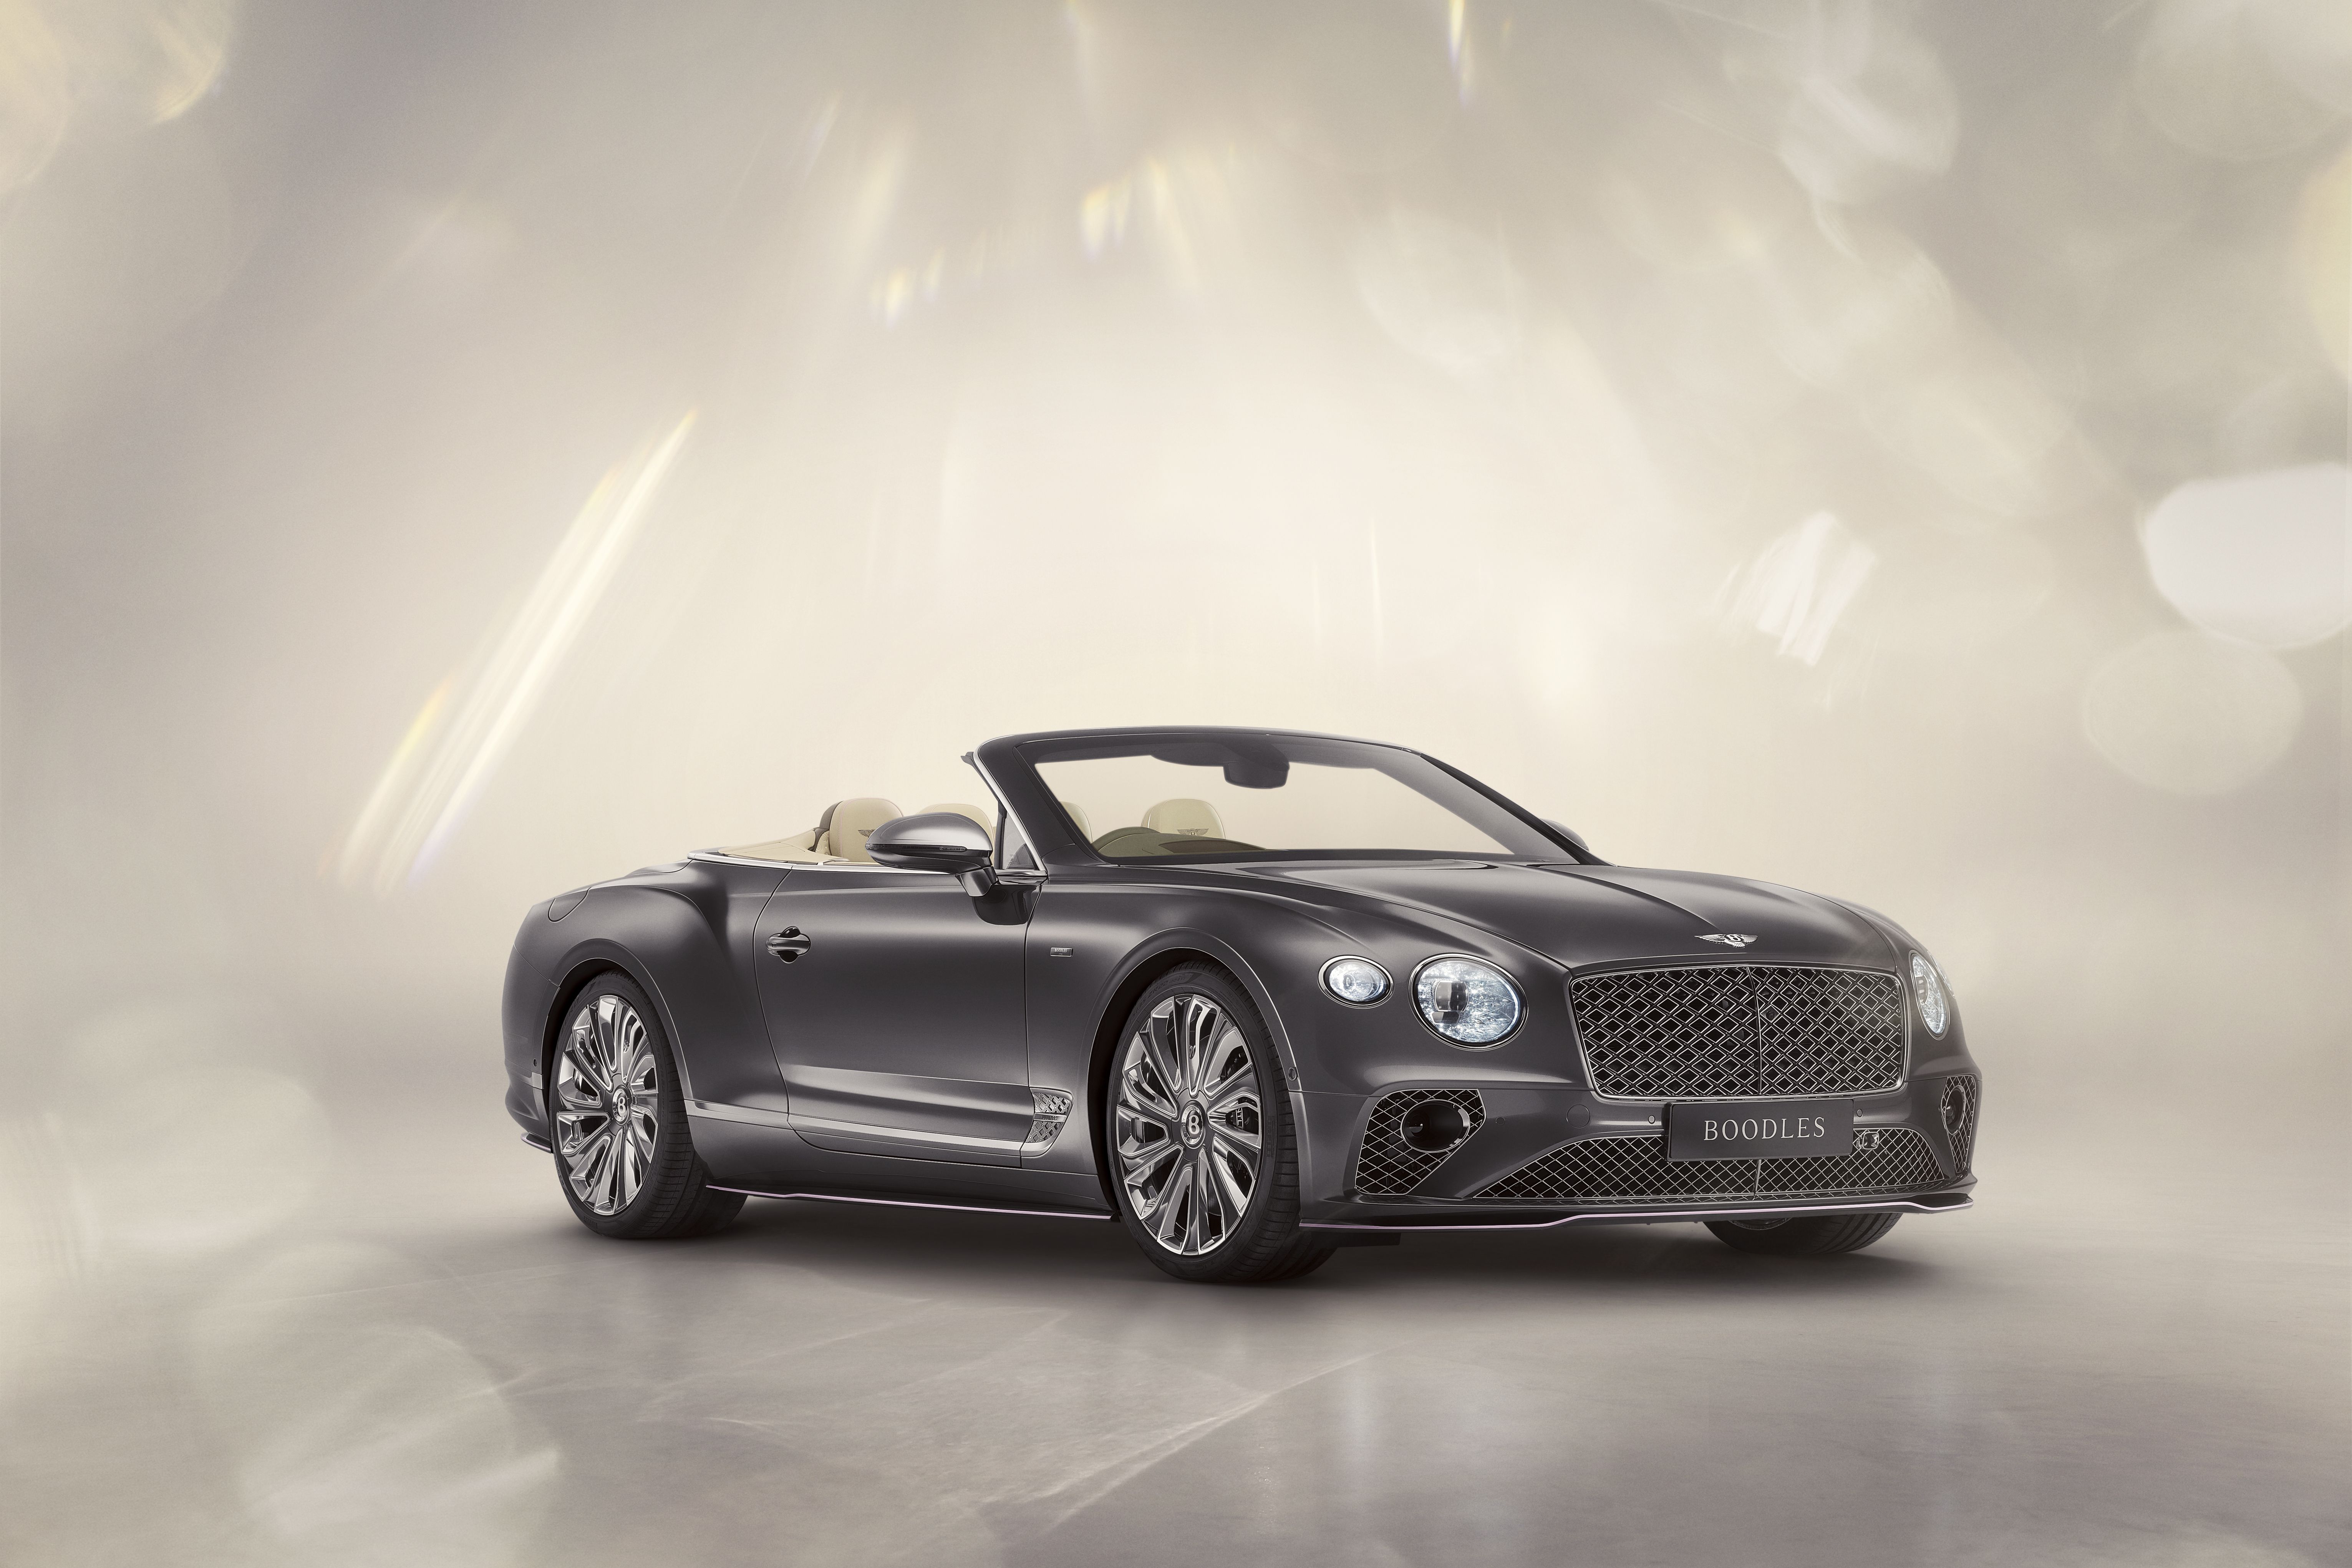 Unveiling the Boodles Bespoke Bentley Continental GTC 